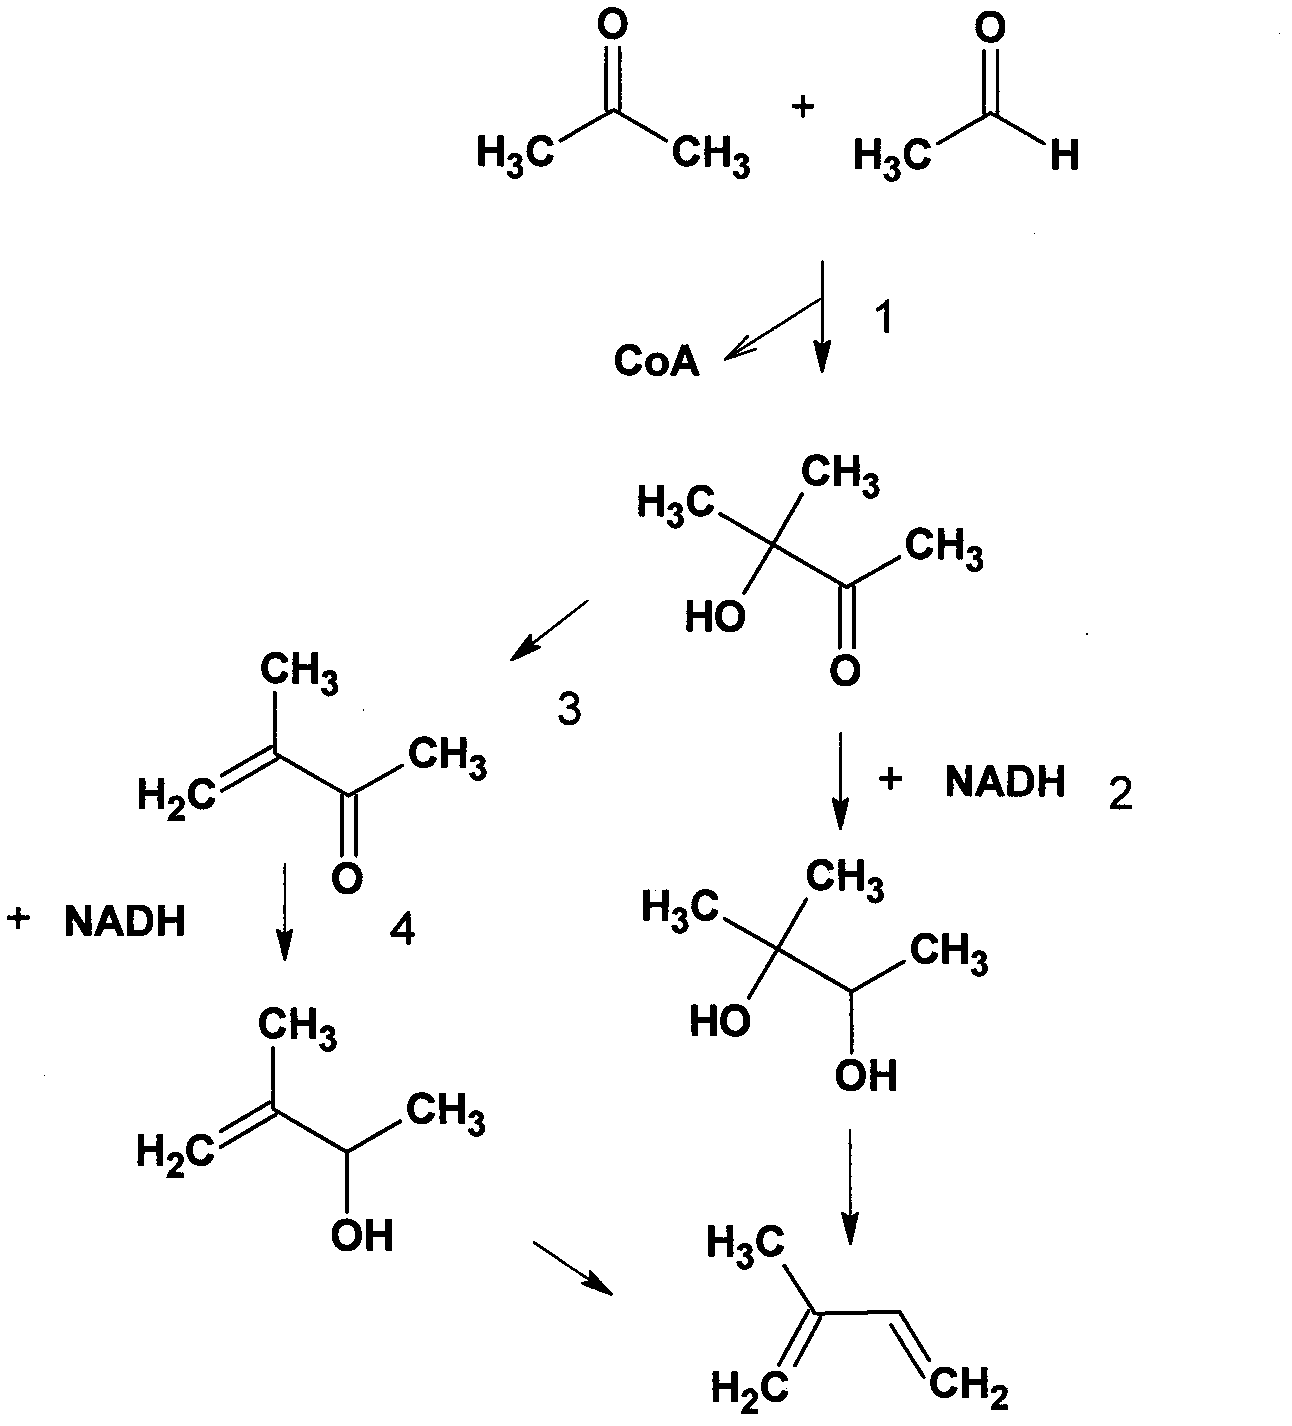 Recombinant cell and method for synthesizing methyl acetoin and derivative compounds thereof by using biological method